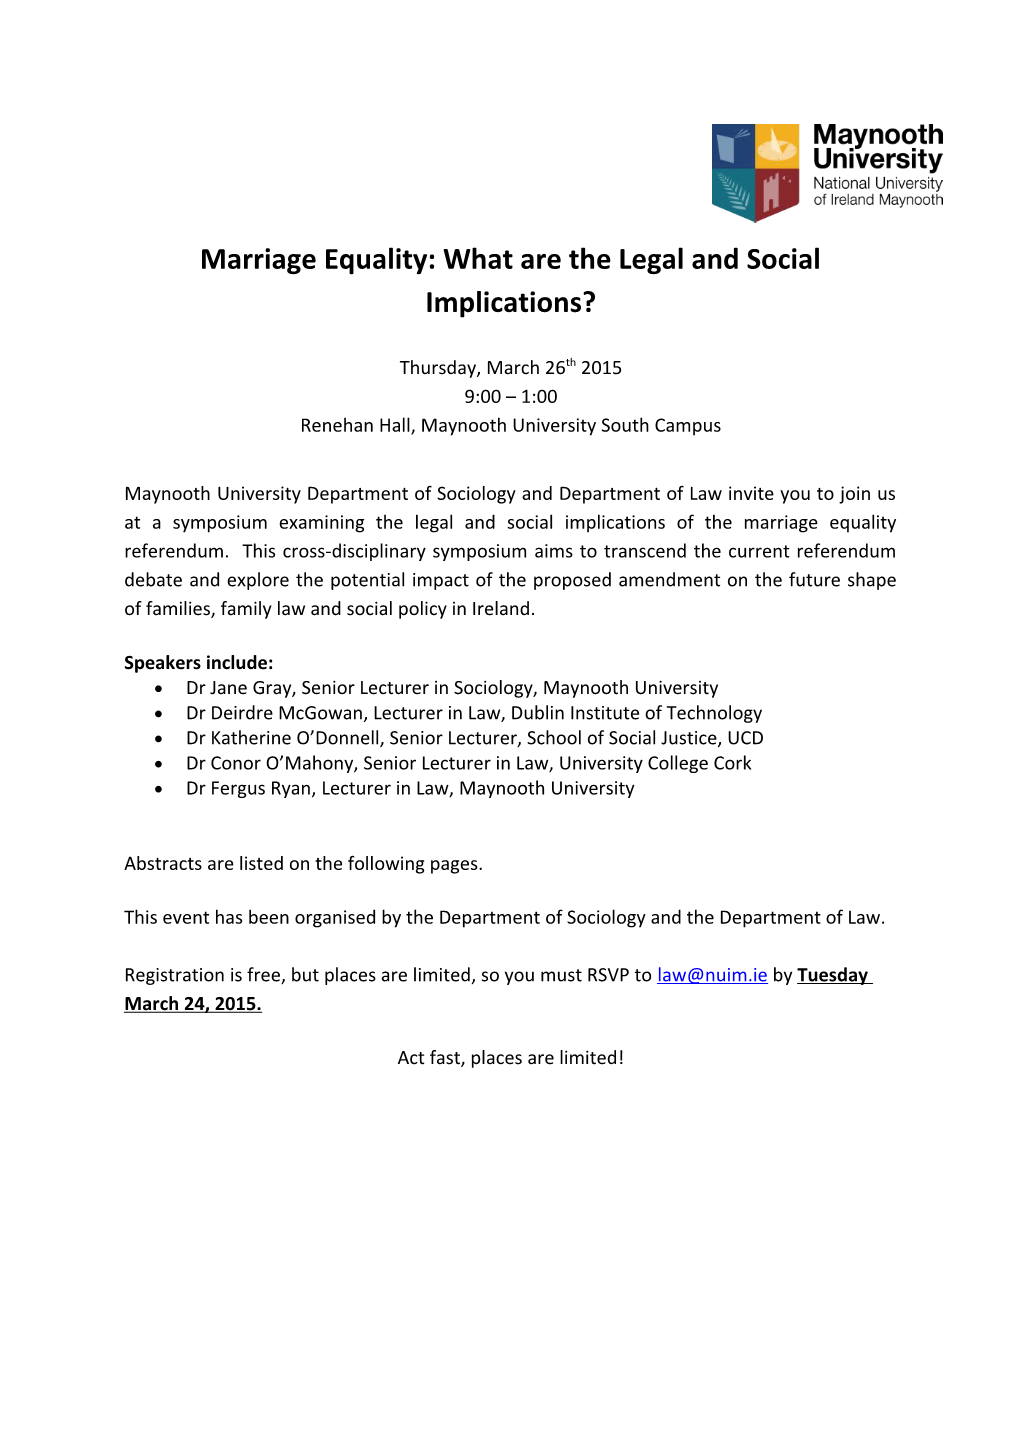 Marriage Equality: What Are the Legal and Social Implications?